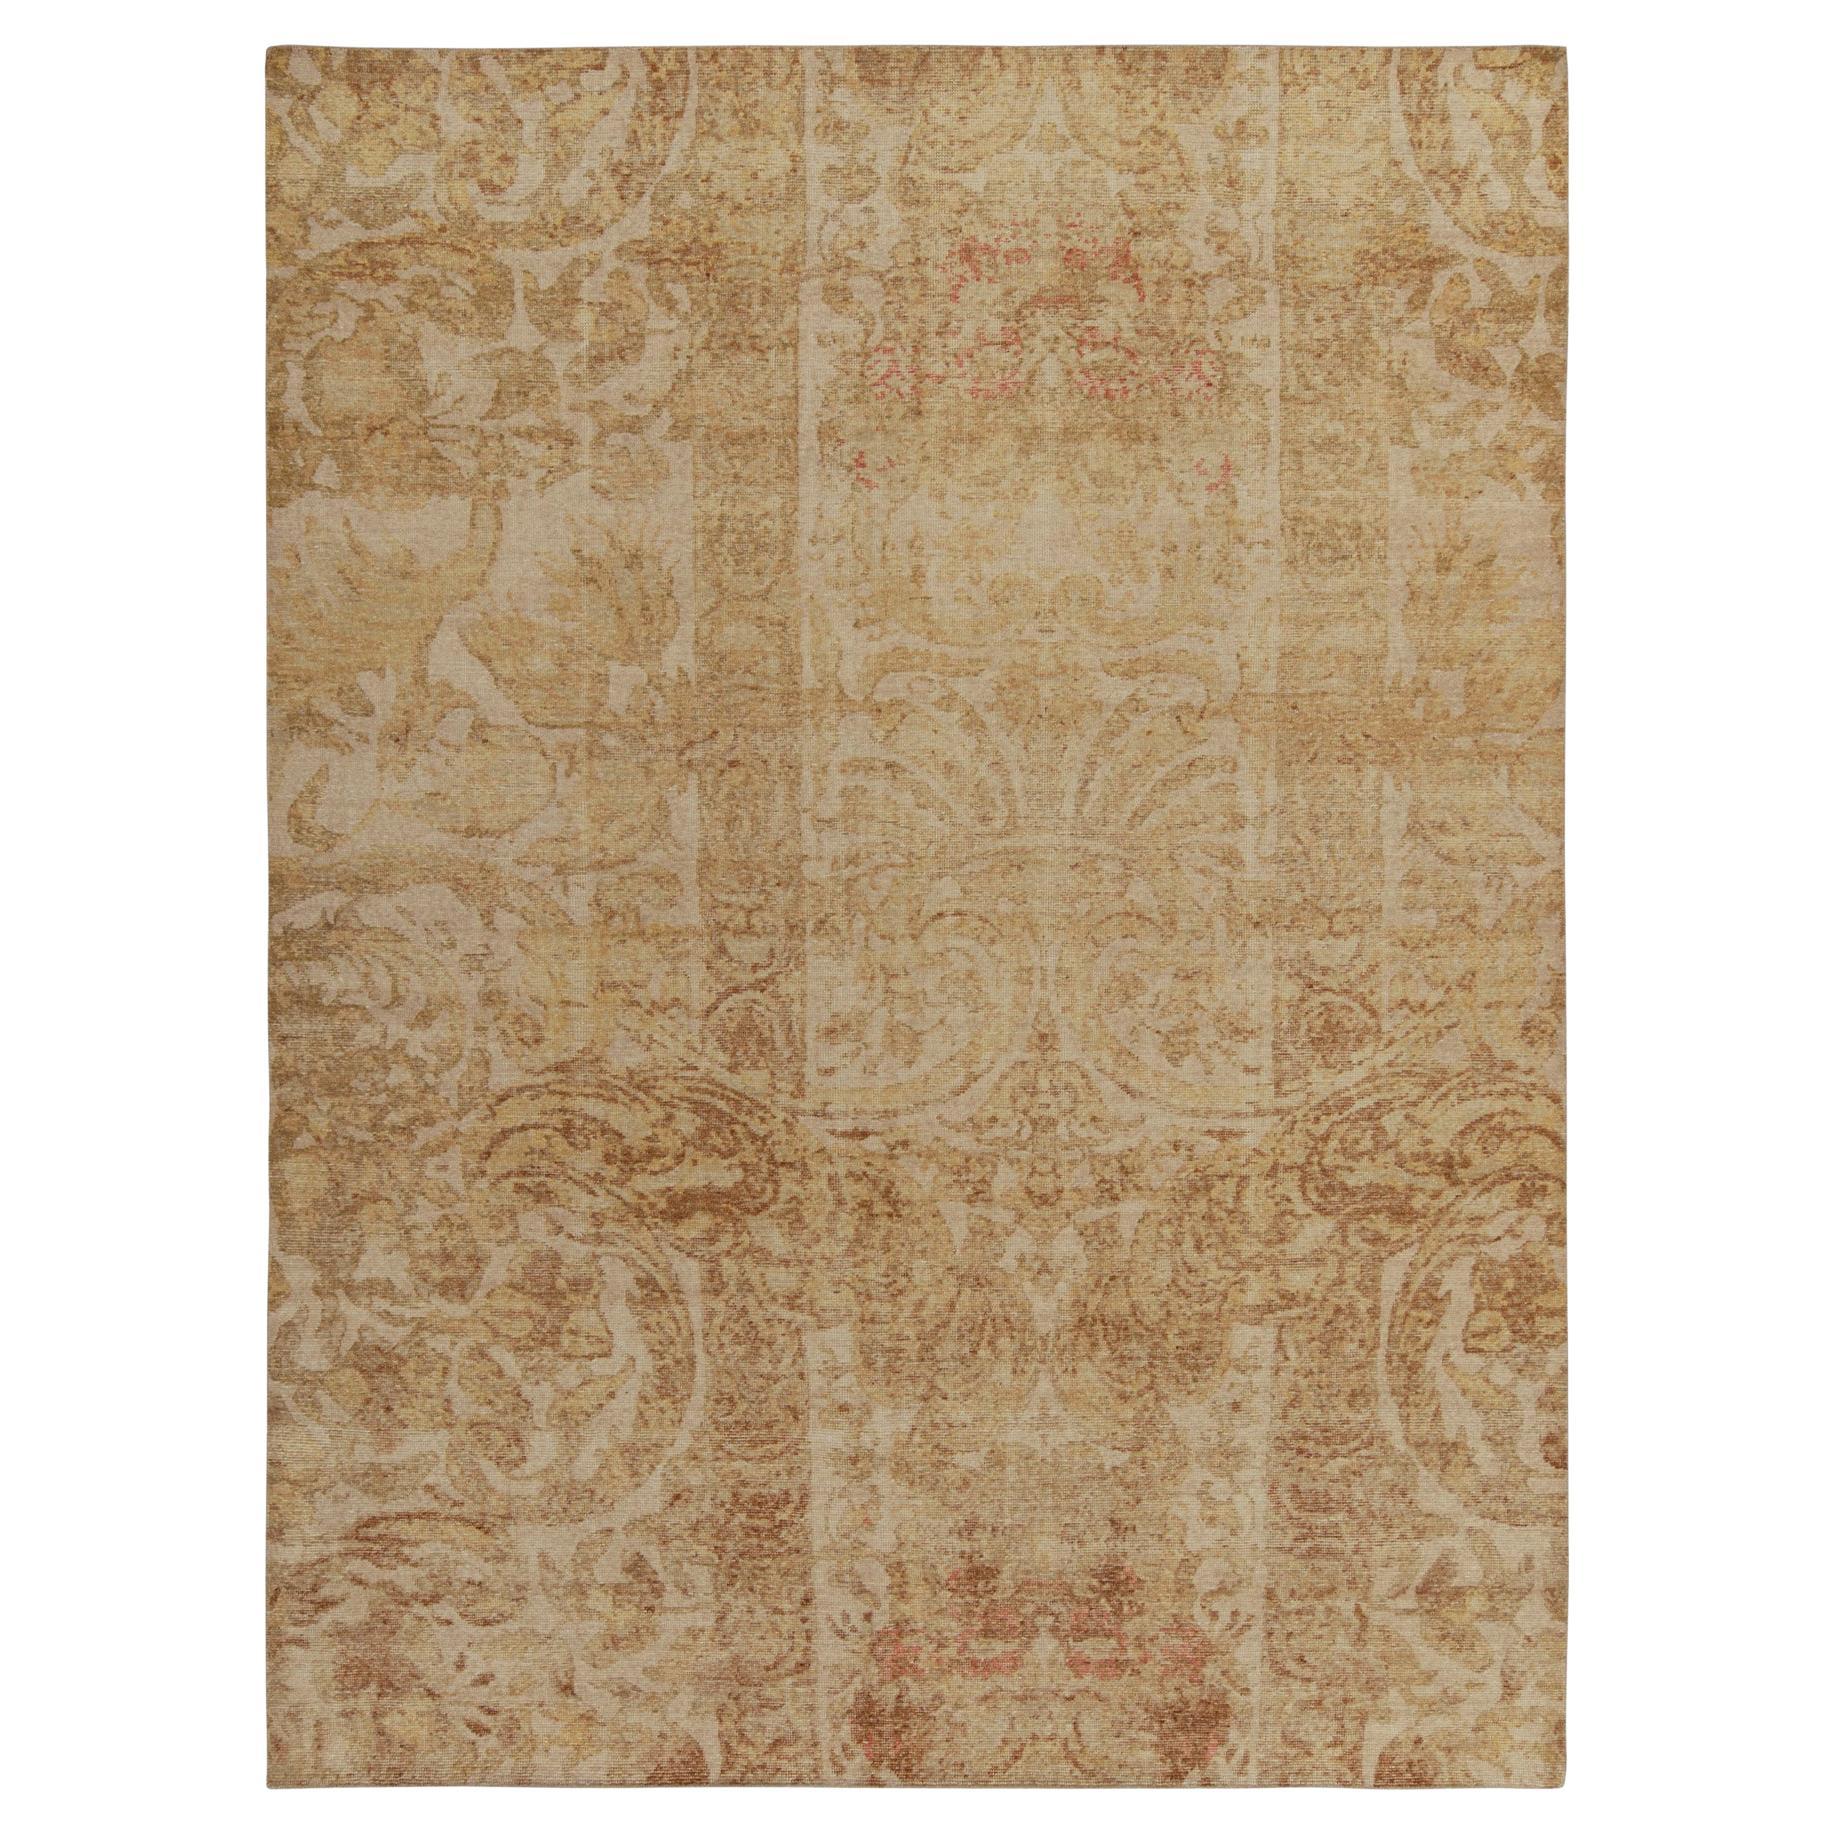 Rug & Kilim’s Distressed European Style Rug in Beige-Brown & Gold Floral Pattern For Sale